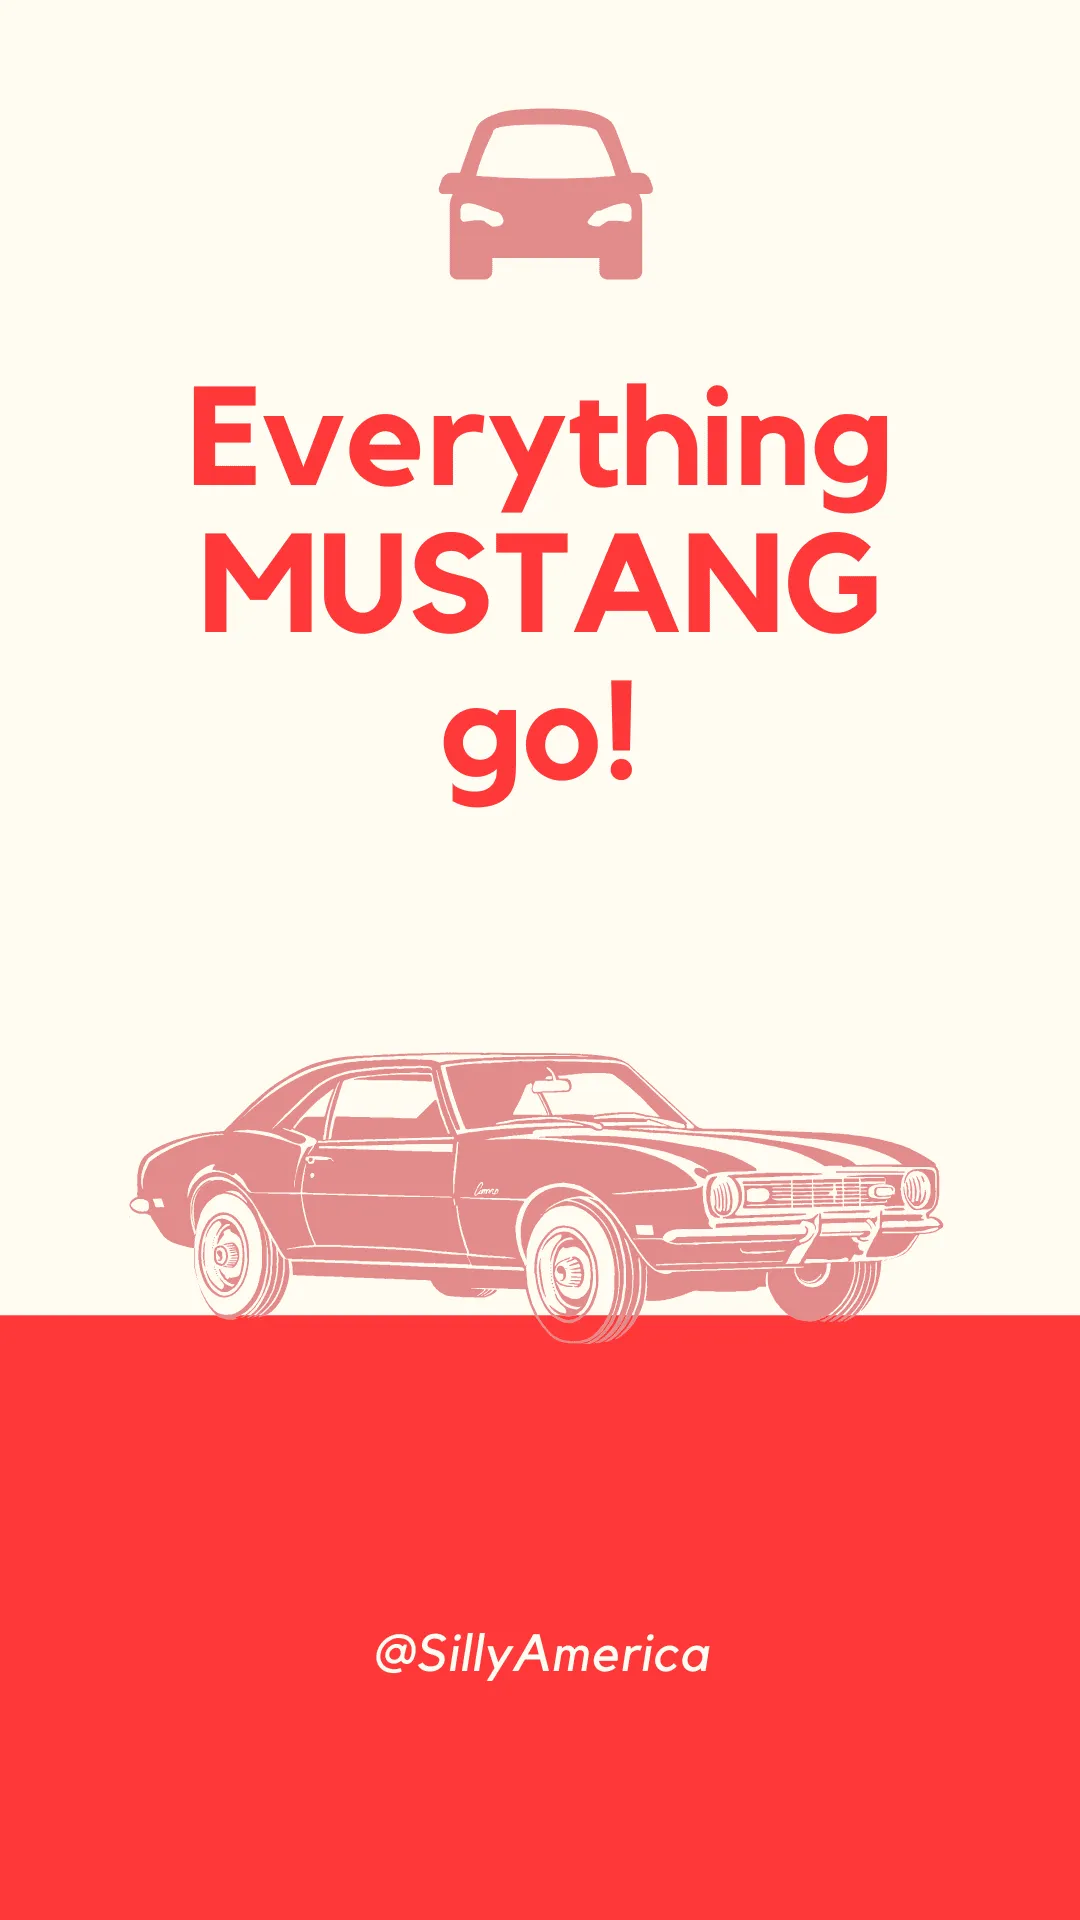 Everything MUSTANG go! - Car Puns to fuel your road trip content!